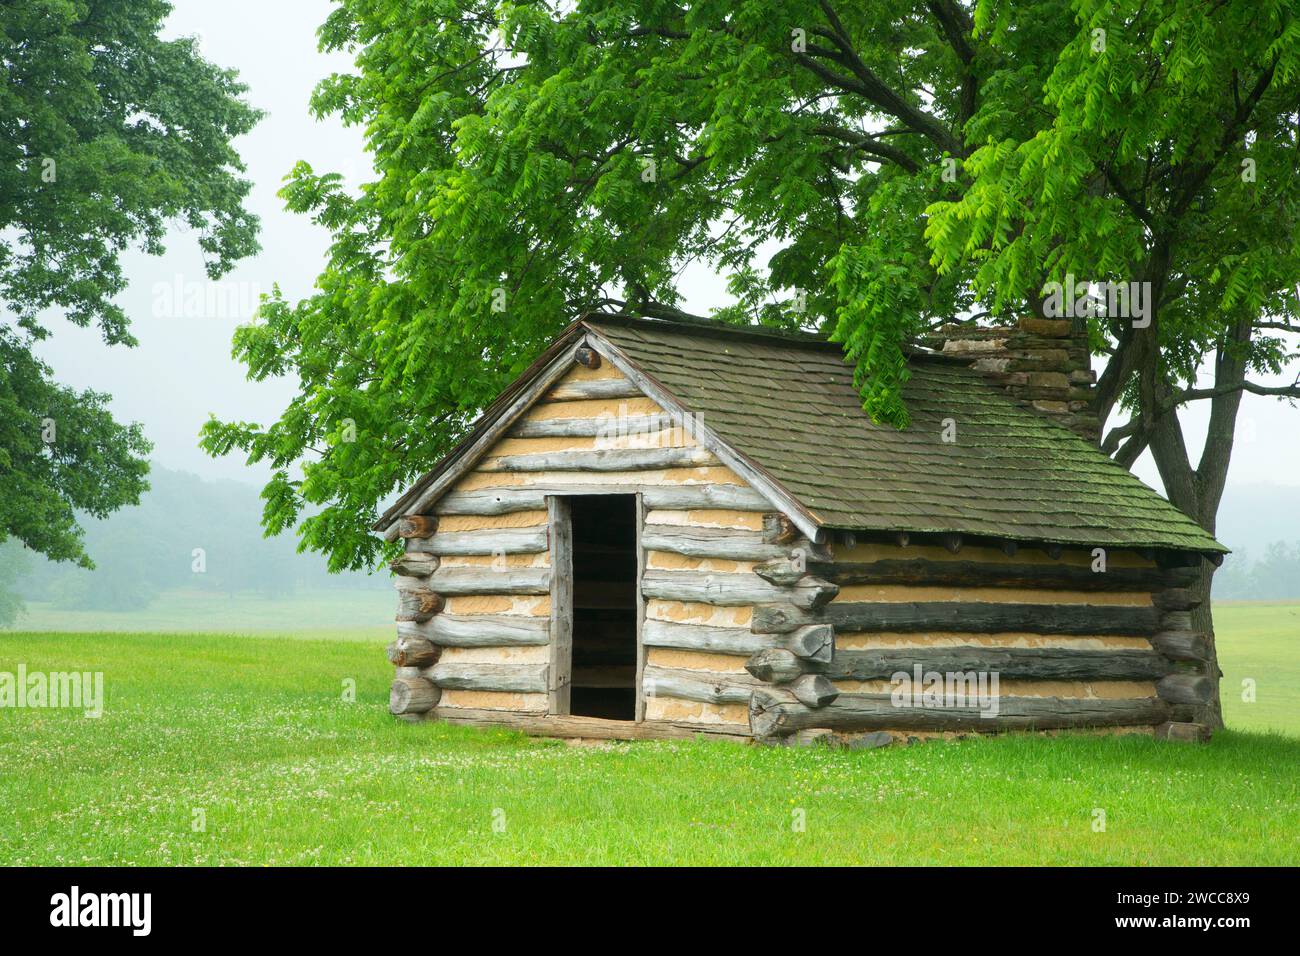 Soldiers hut, Valley Forge National Historic Park, Pennsylvania Stock Photo